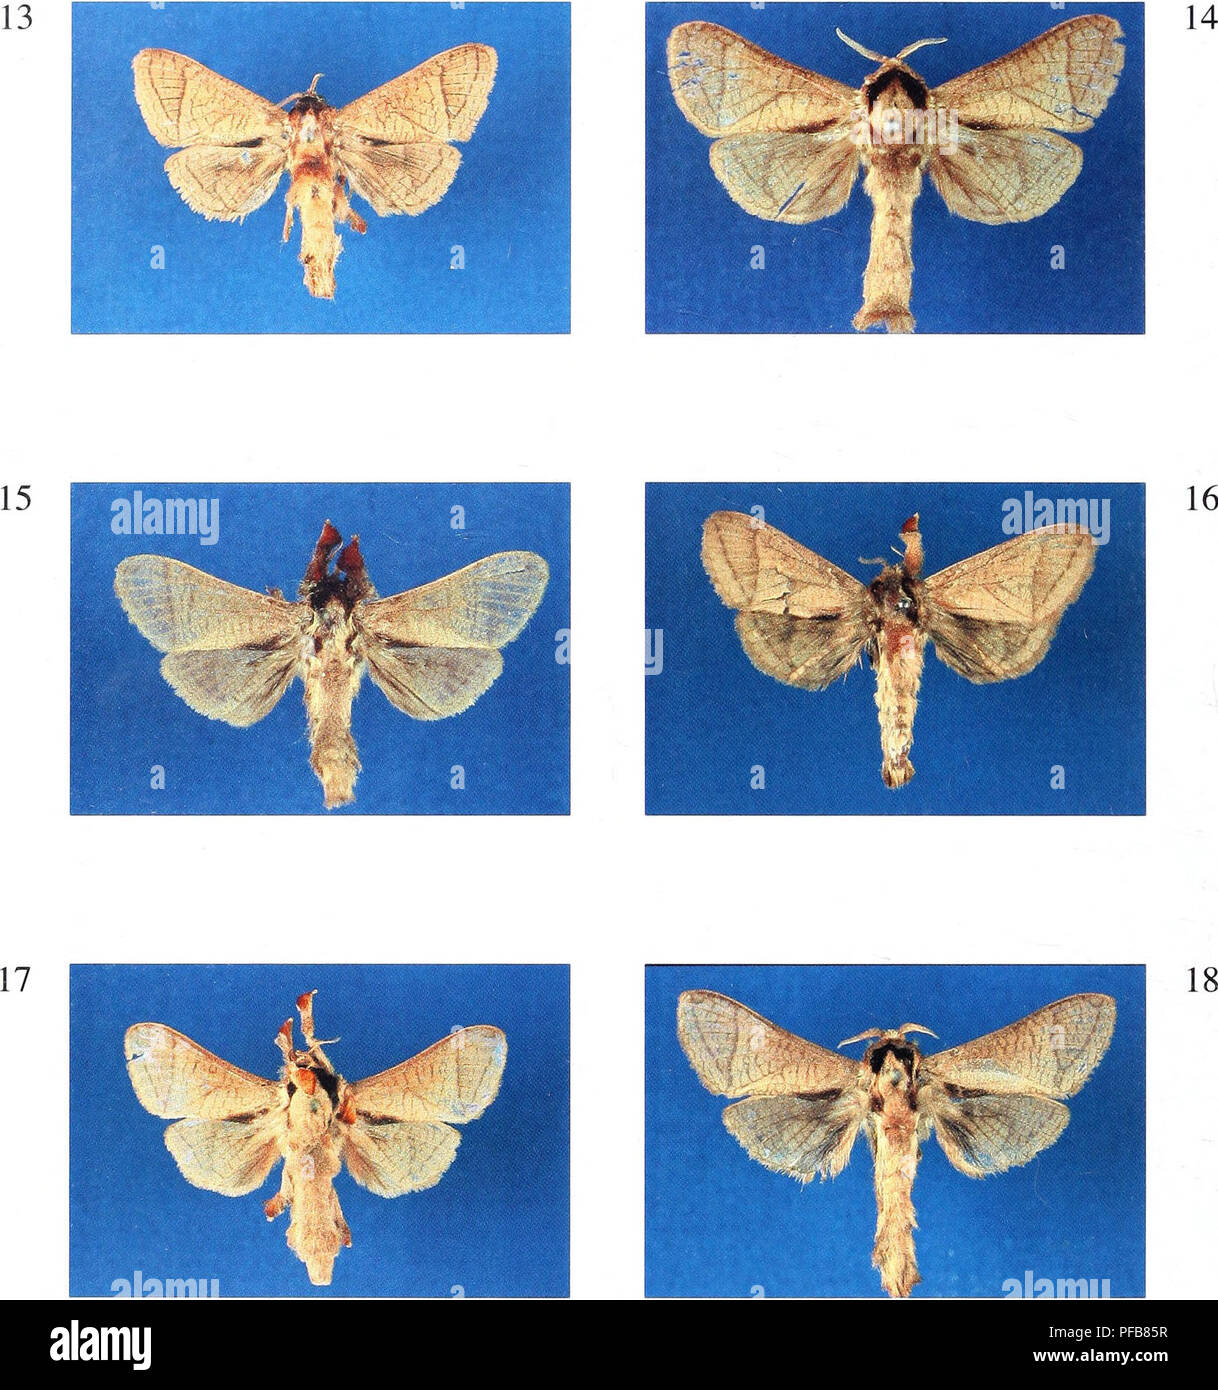 . The description of a new genus and twenty-three new species of Metarbelidae (Lepidoptera : Cossoidea) from the lowland tropical rain forests of the Guineo-Congolian Region with notes on habitats and biogeography / Ingo Lehmannn. 62. Figure 13. Haberlandia lusamboensis spec, nov., female, paratype, Democratic Republic of Congo, Kasai'-Oriental province, Katako-Kombe. Figure 14. Haberlandia entebbeensis spec, nov., male, holotype, Uganda, Wakiso district, Entebbe. Figure 15. Haberlandia isakaensis spec, nov., male, holotype, Democratic Republic of Congo, Equateur province, Isaka. Figure 16. Ha Stock Photo